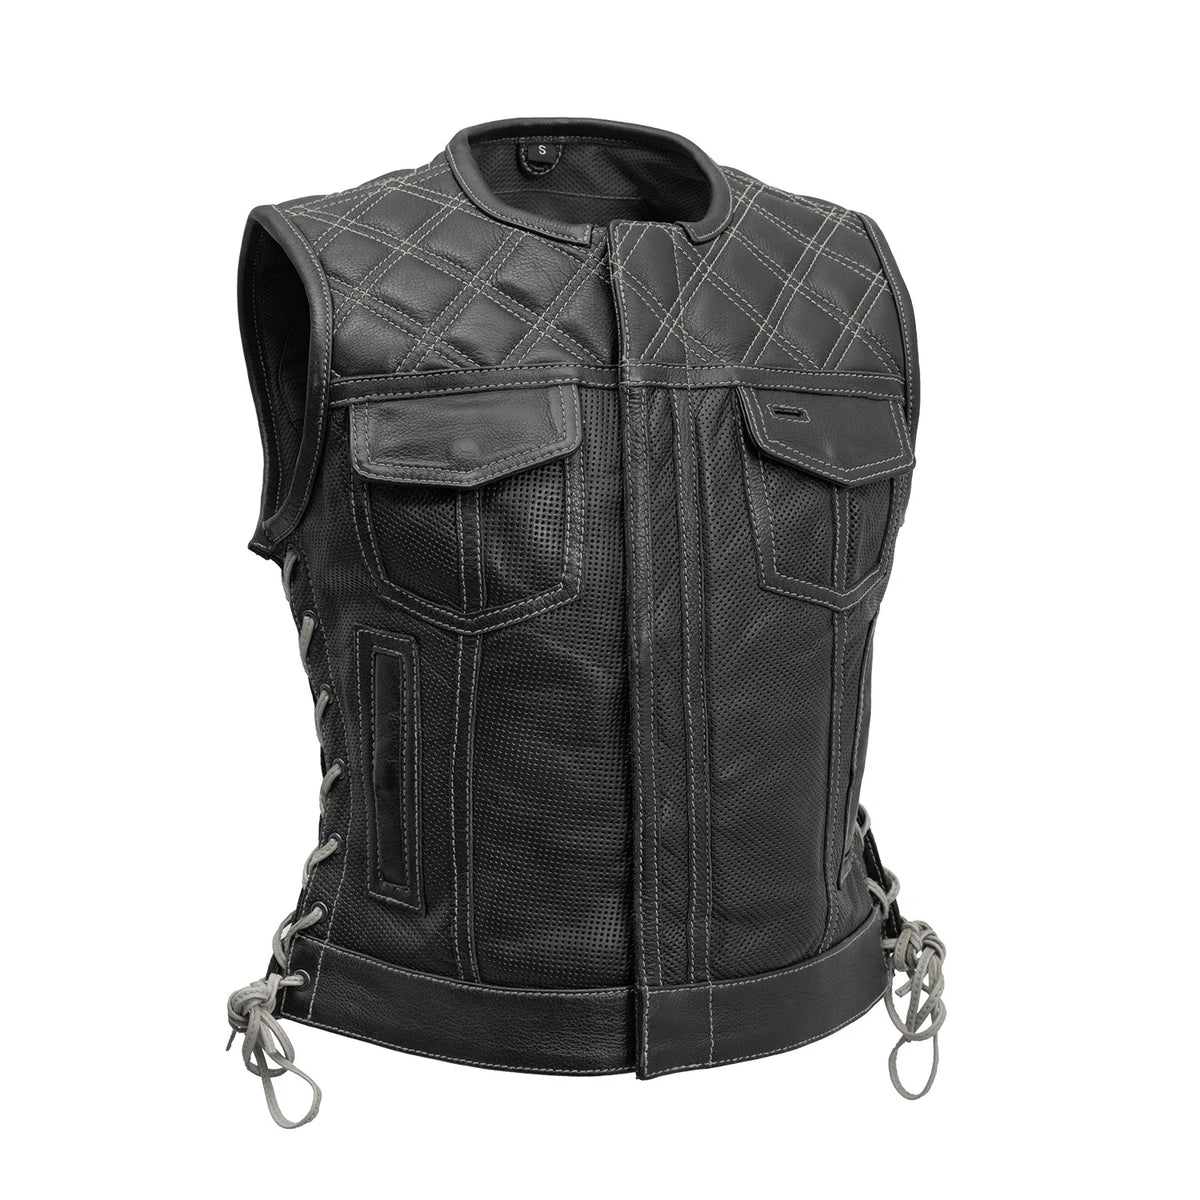 Bonnie Perforated Women's Motorcycle Leather Vest Women's Leather Vest First Manufacturing Company Black Grey XS 